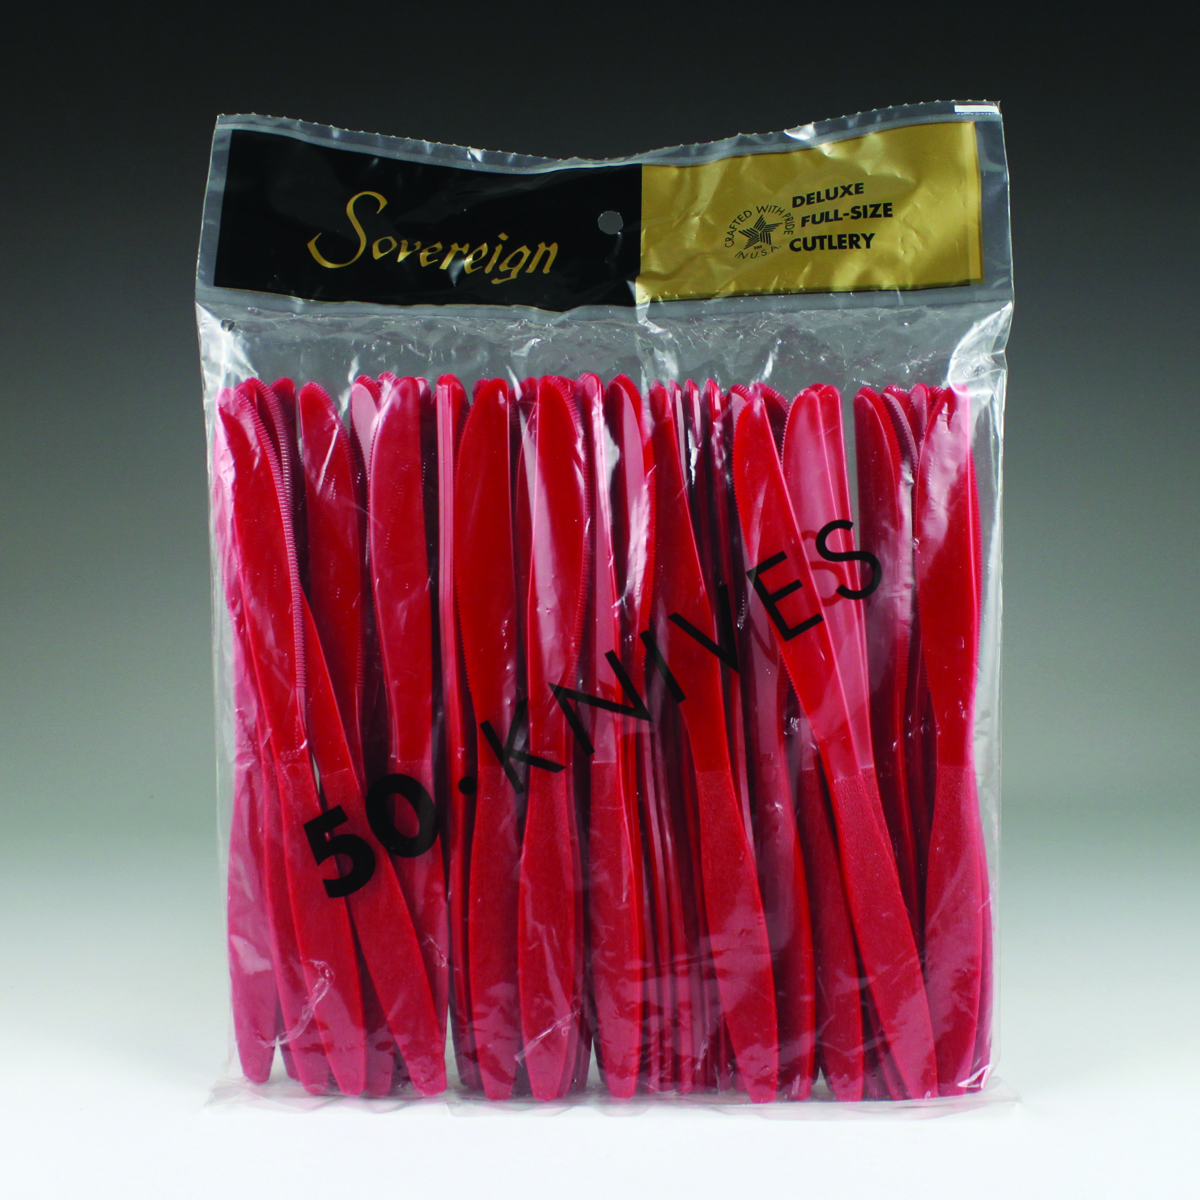 Sovereign Poly Bagged (50 Ct.) - Knives